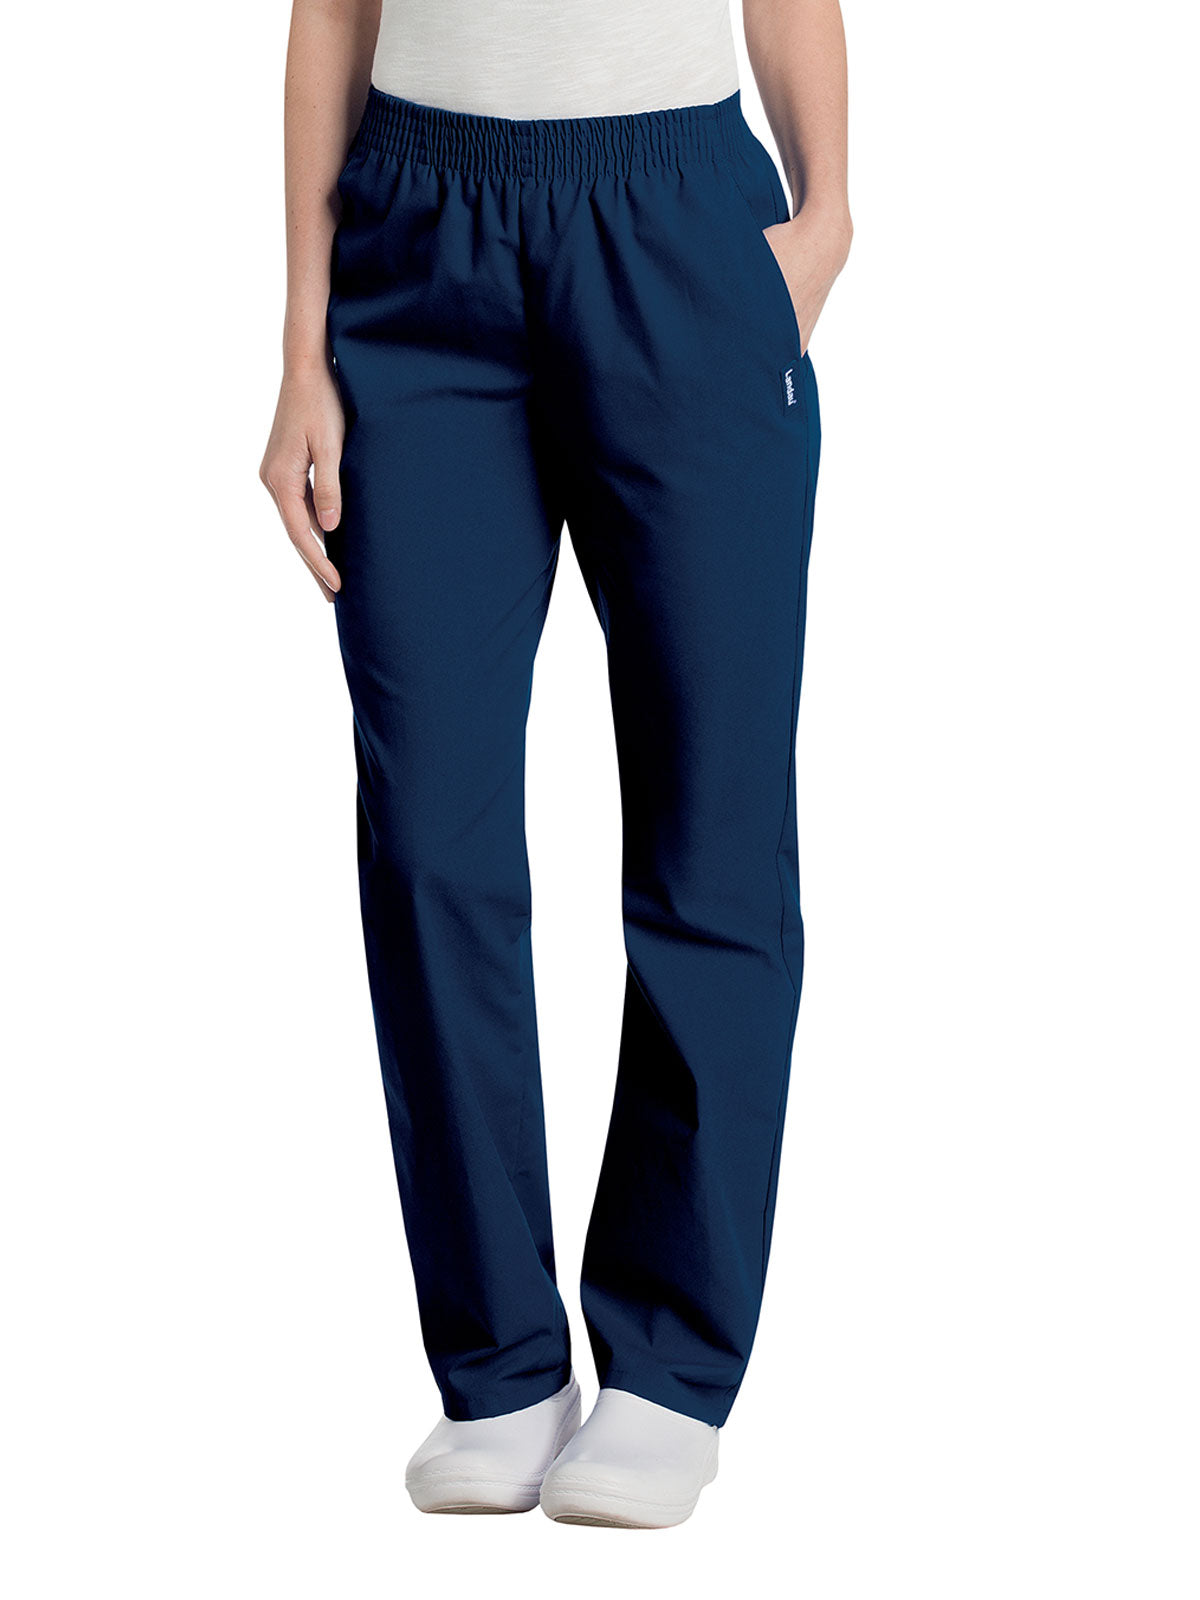 Essentials - Women's Classic Relaxed Fit Scrub Pant [3]